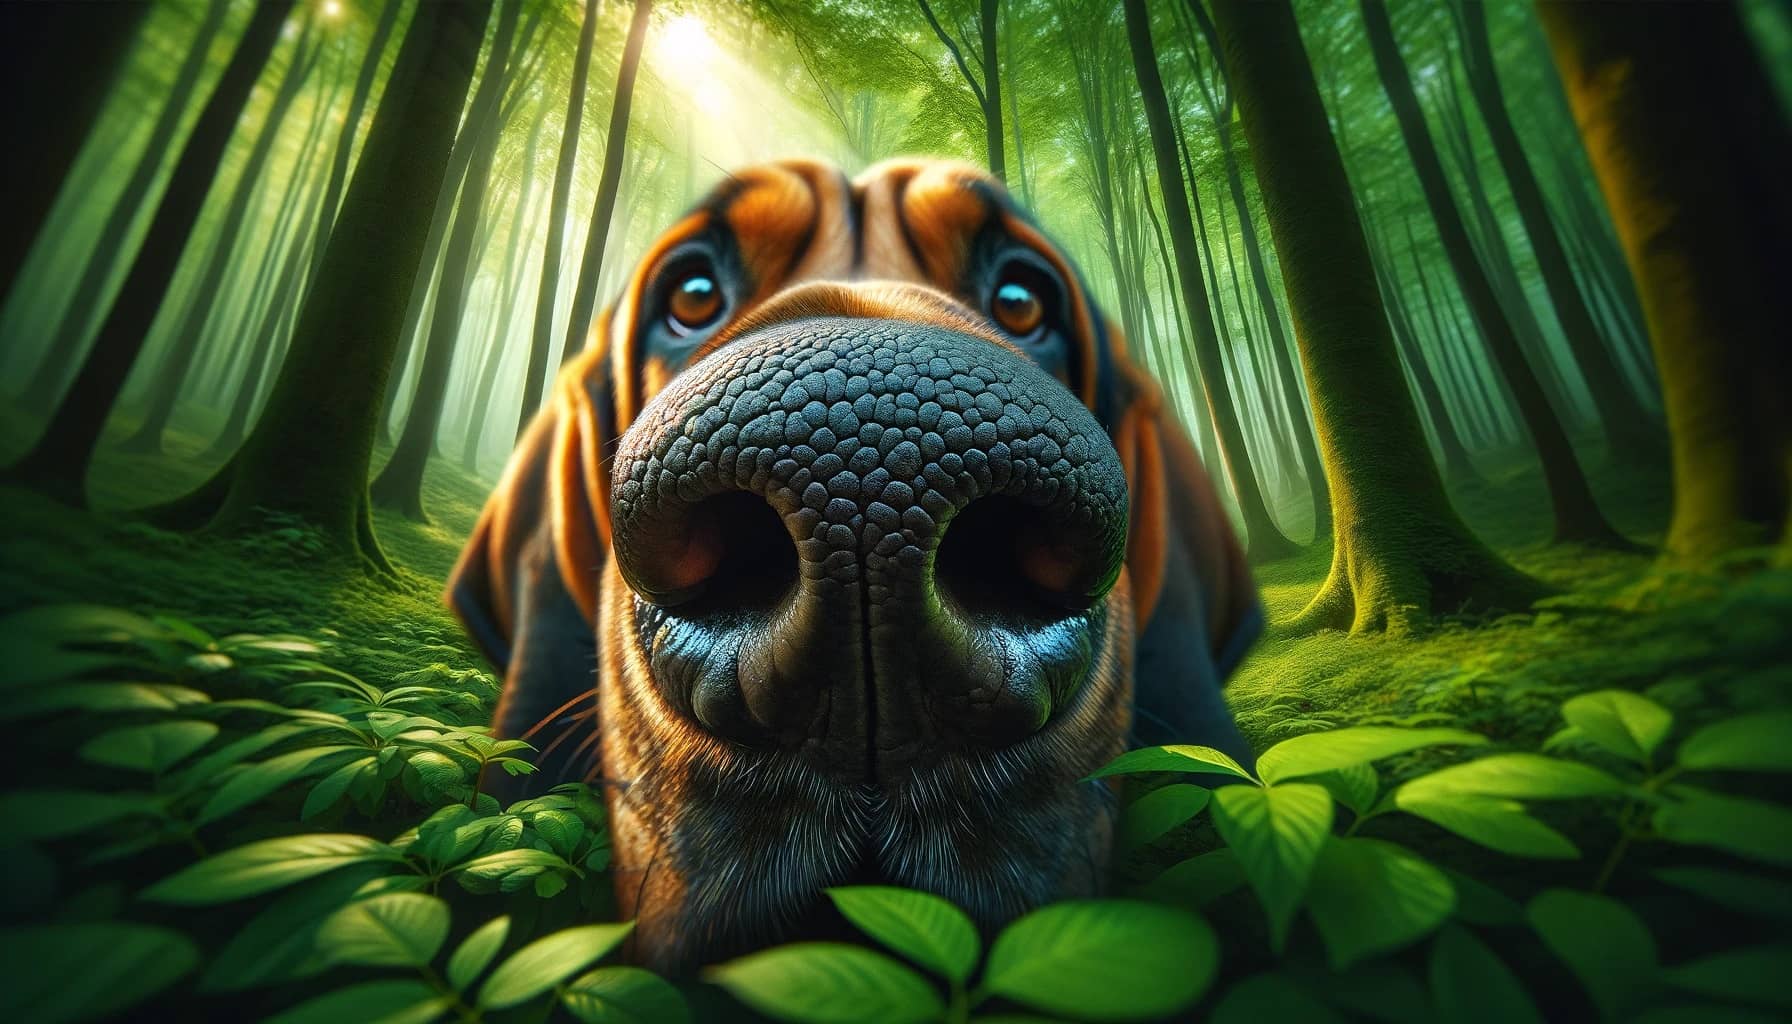 Bloodhound's detailed and wrinkled nose in an extreme close-up as it follows a scent trail in a lush, green forest